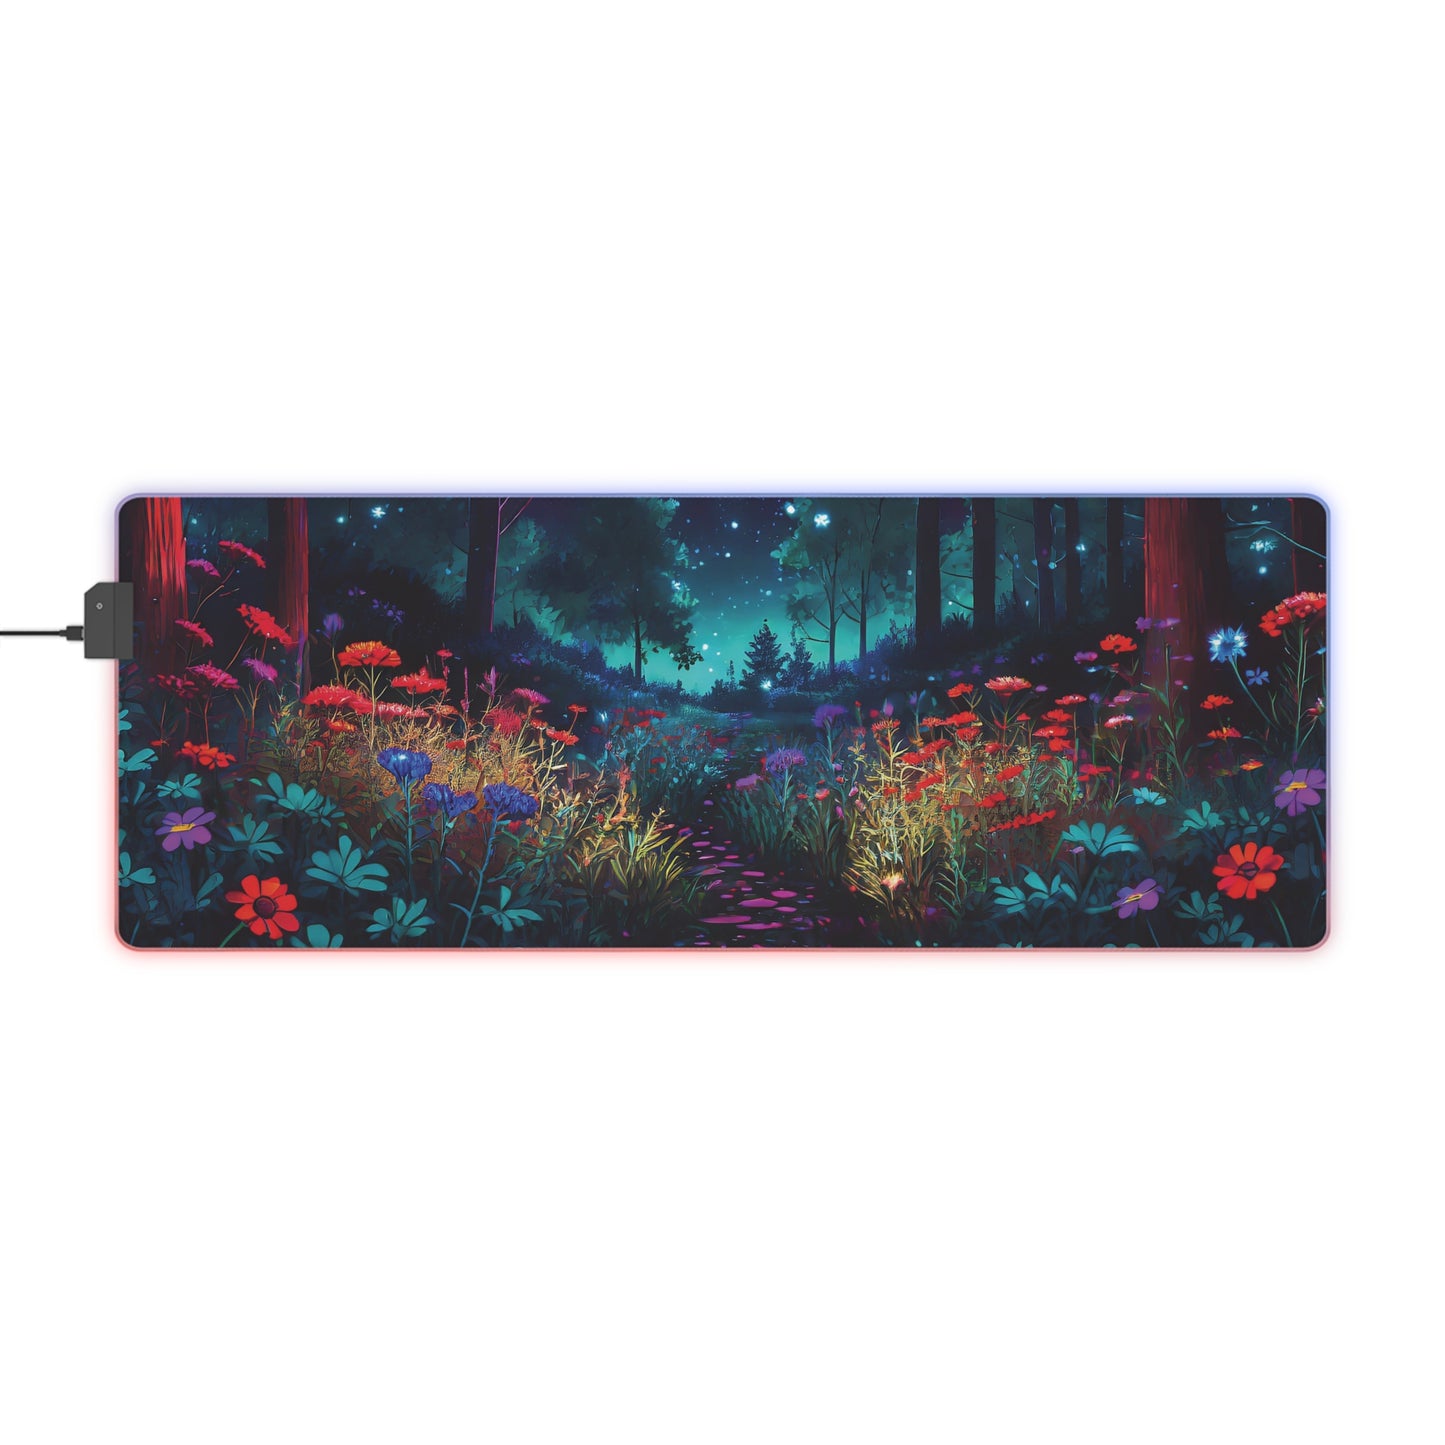 Gaming Desk Enchanted Forest Night Sky Large Gaming Mousepad, Starry Office Decor, Computer Accessory LED for Gamer Mouse Pad